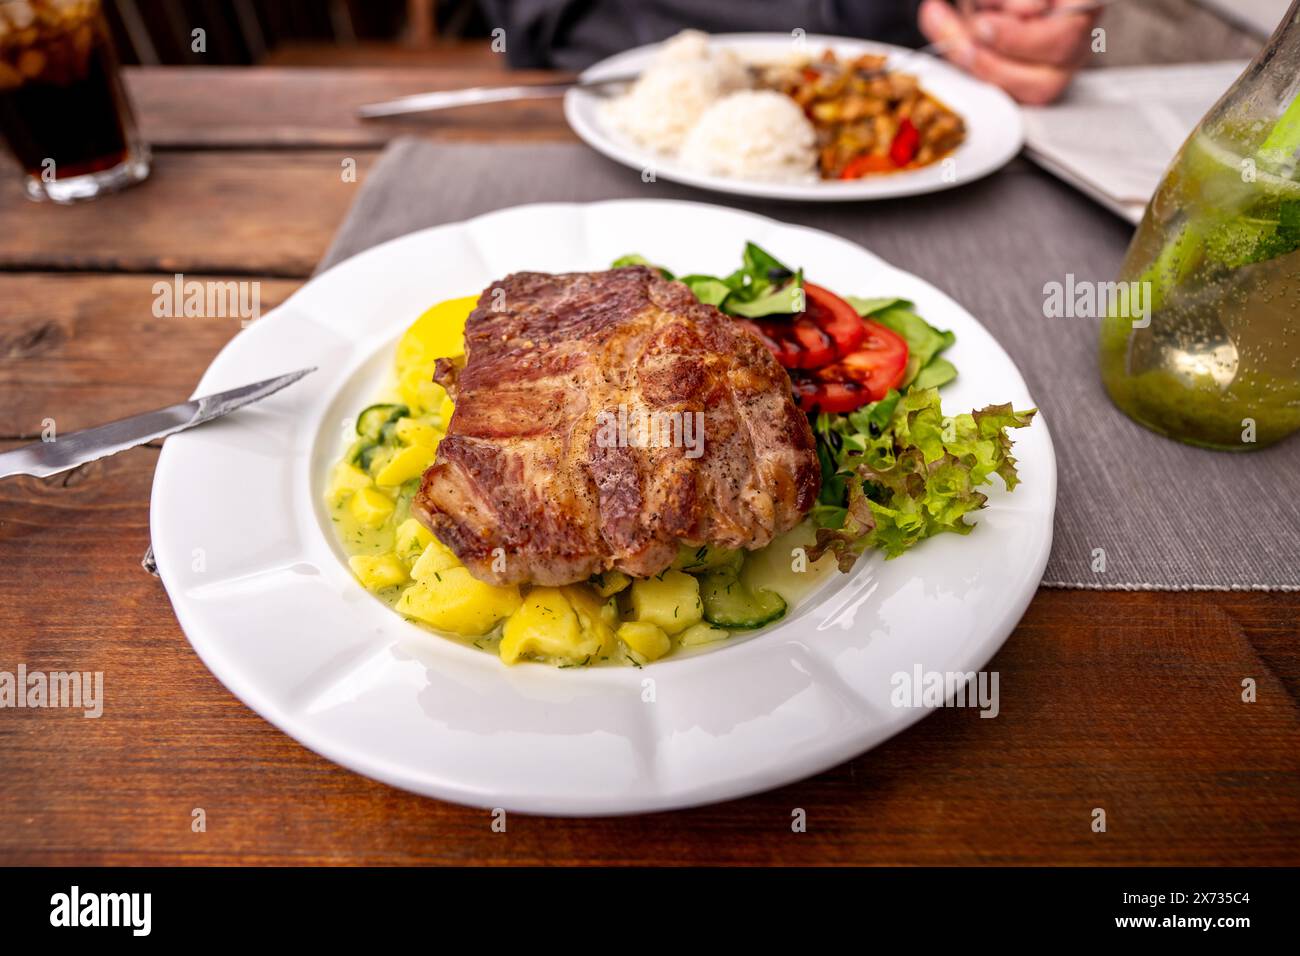 Juicy pork steak with light potato salad and vegetable on white plate, second plate on background with rice, chicken meat with red pepper, drink, knif Stock Photo